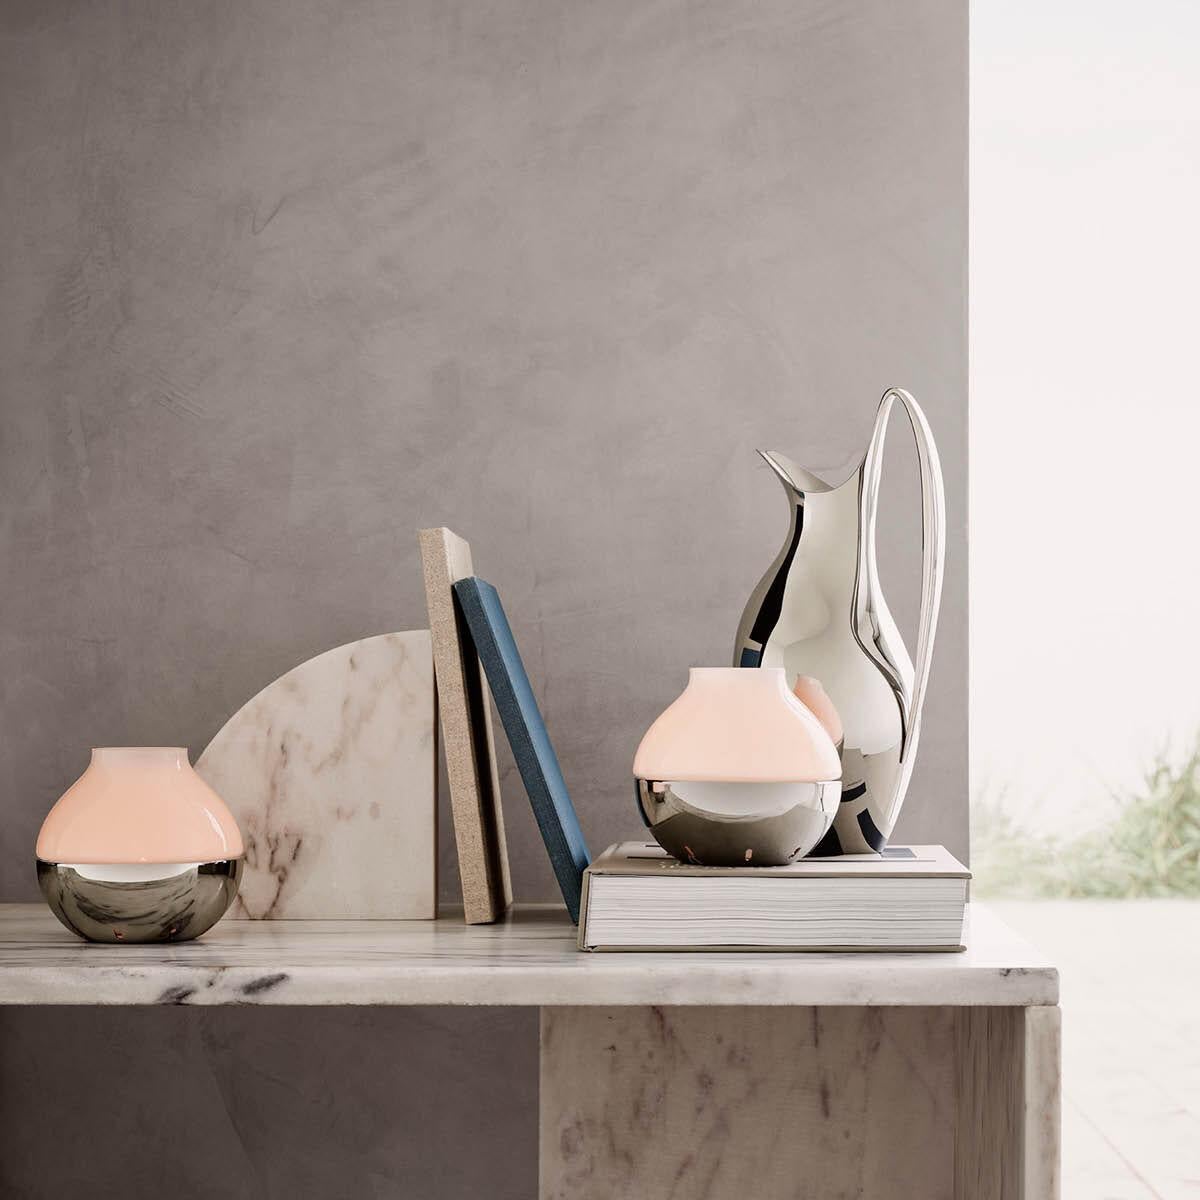 Inspired by original Henning Koppel pieces, this beautiful frosted glass and stainless steel hurricane candleholder for use with tea-lights is a perfect example of form and functionality. The elegant shape contrasts the two very different materials